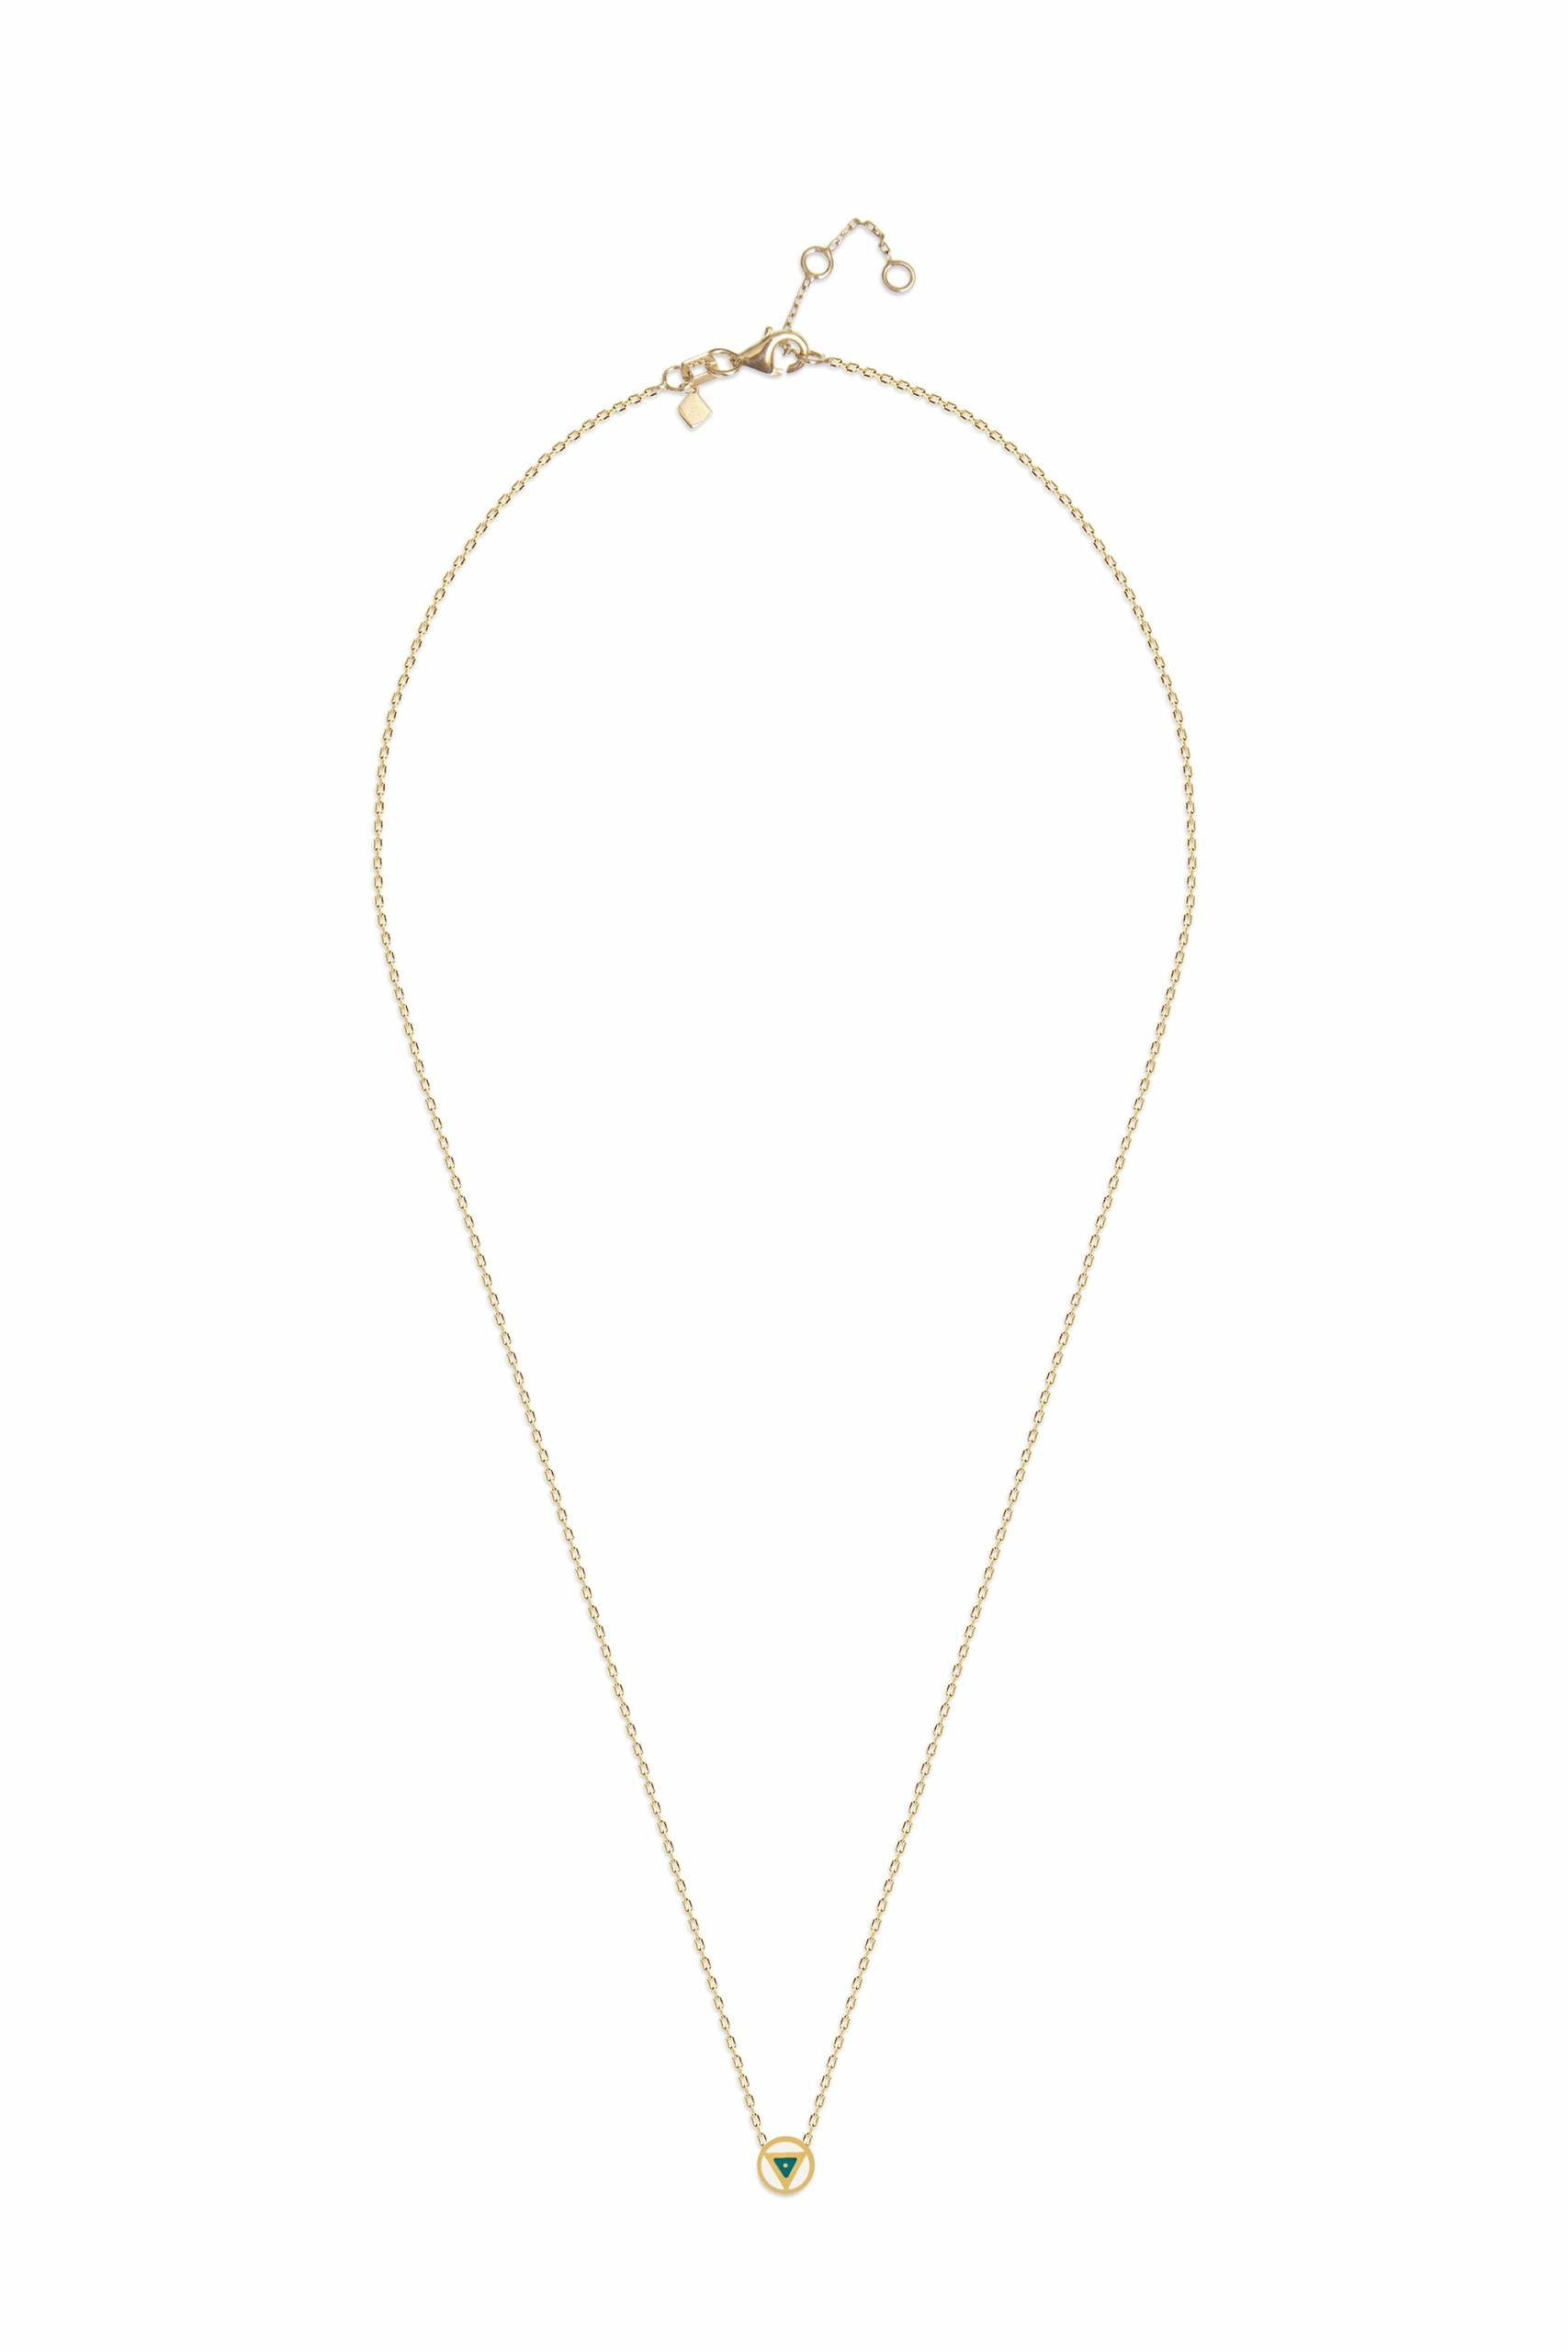 Enamel Triangle Gold Necklace